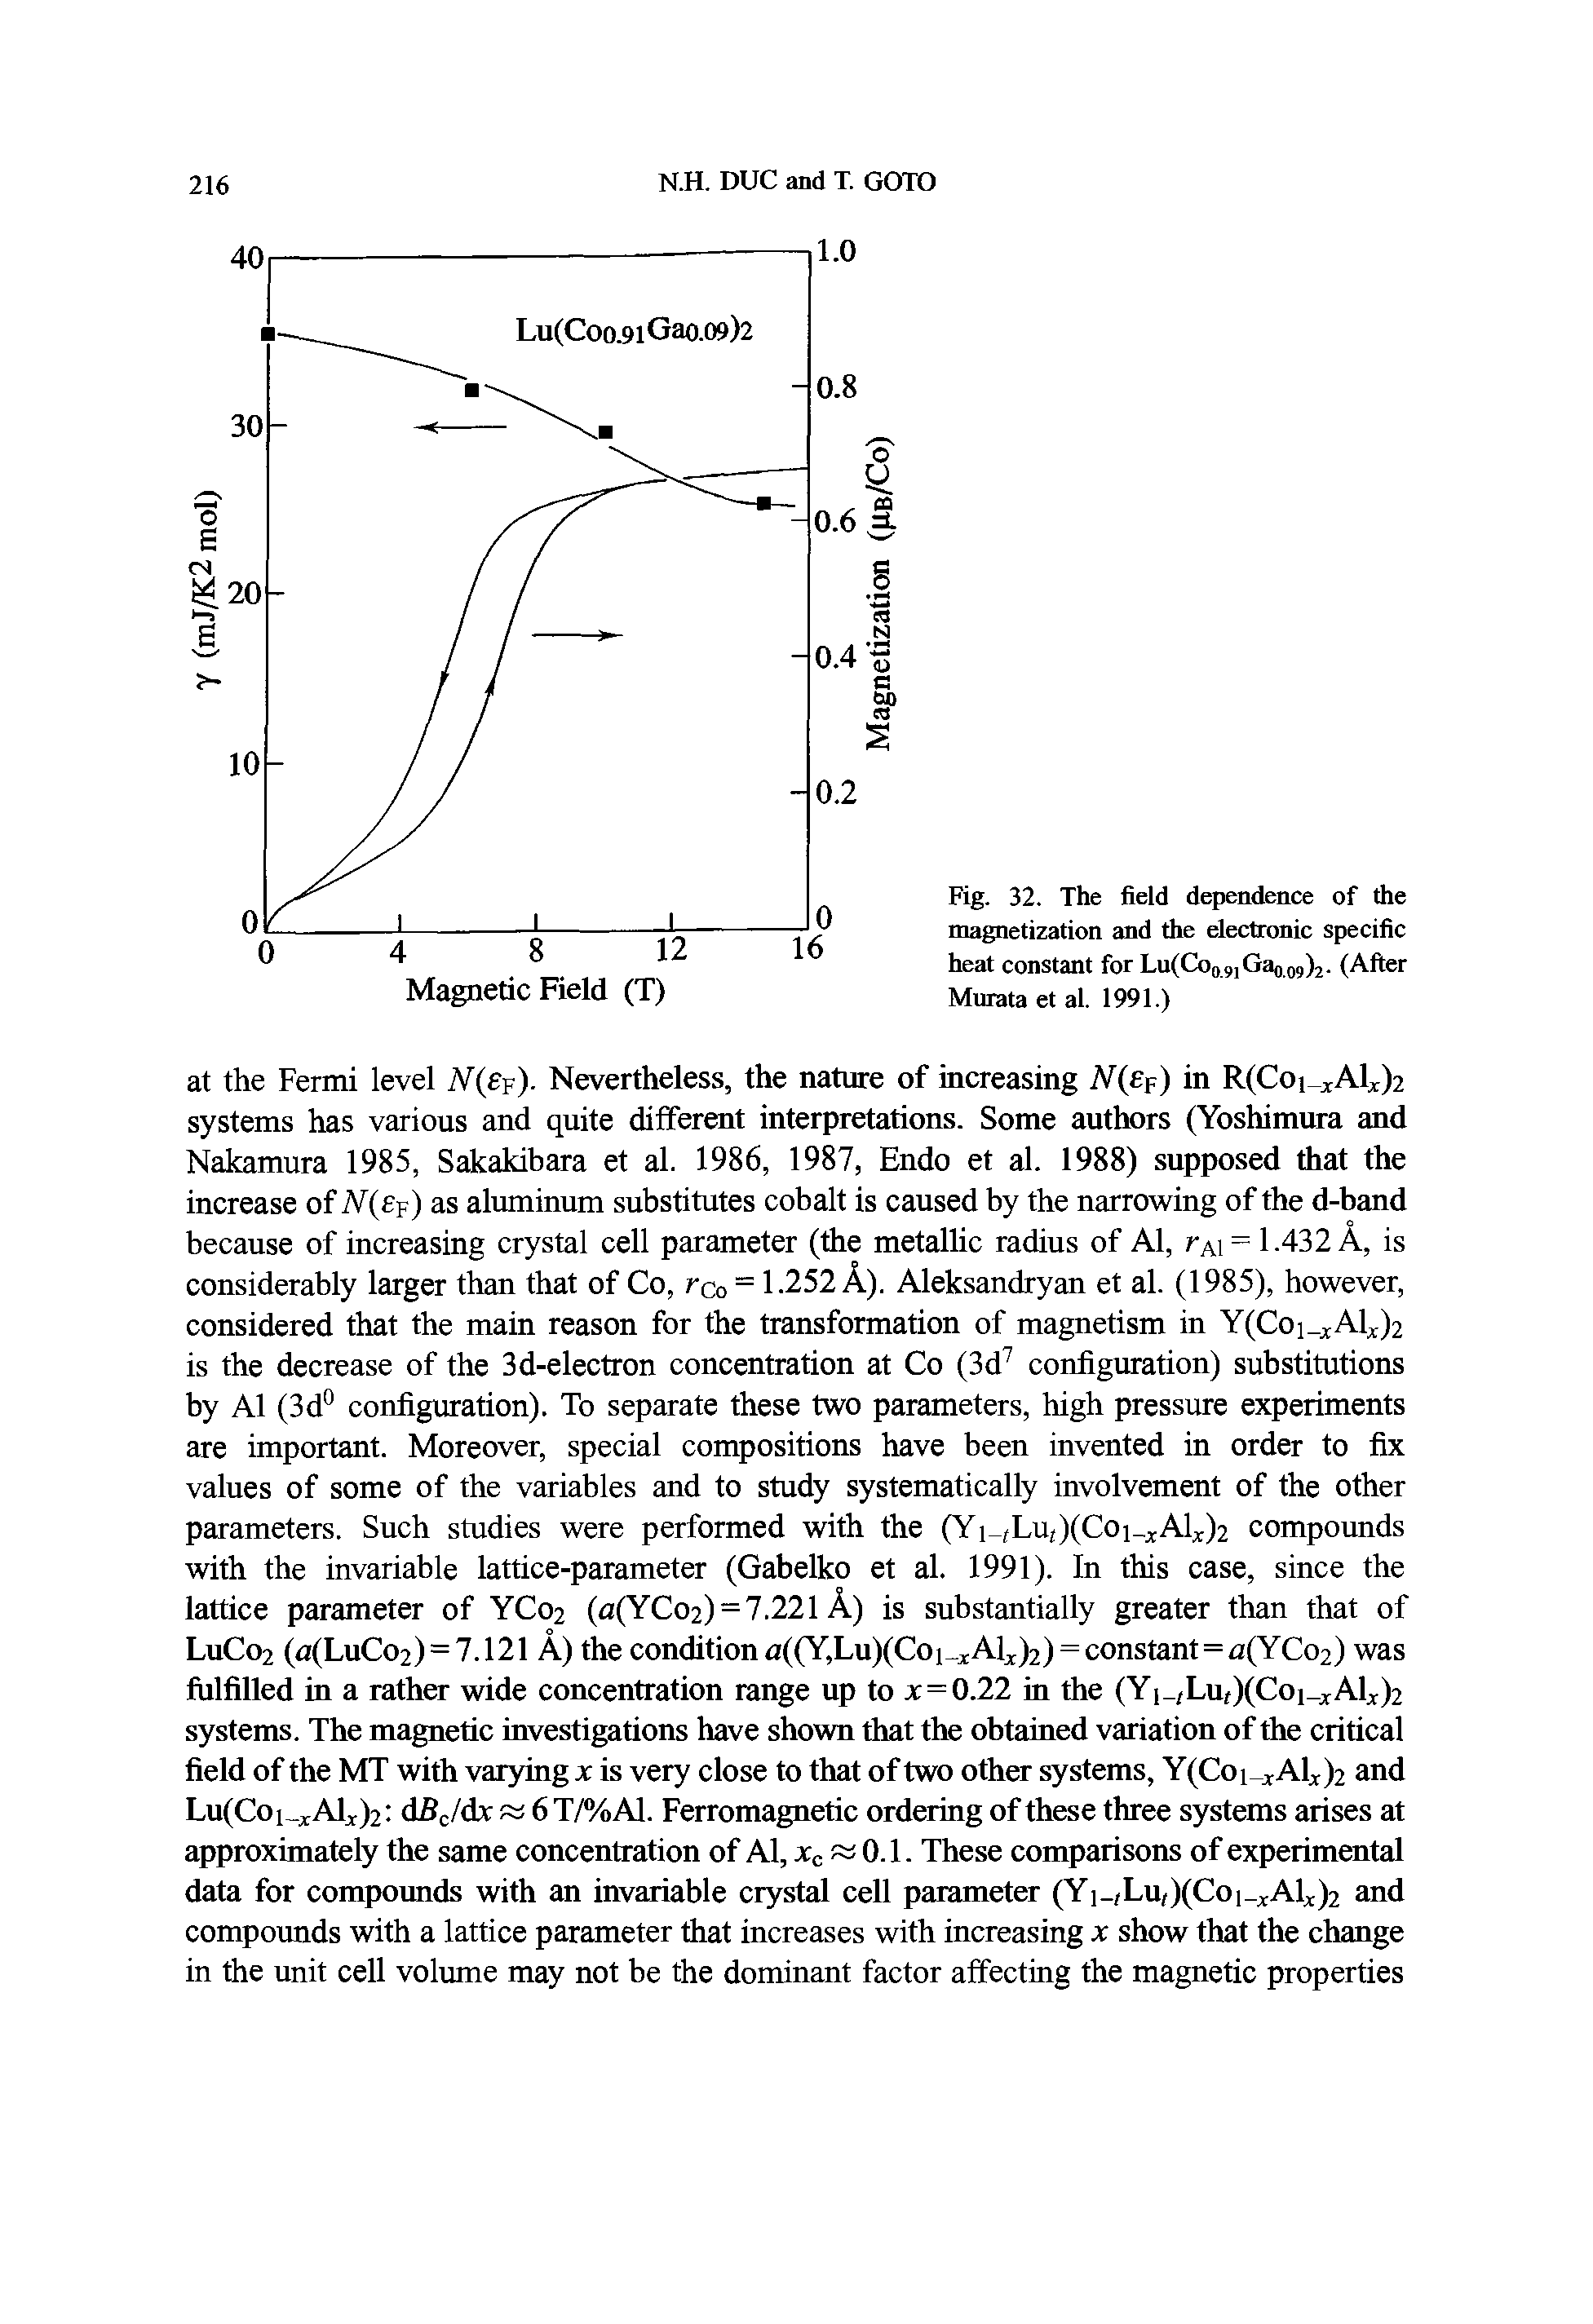 Fig. 32. The field dependence of the magnetization and the electronic specific heat constant for Lu(Q)Q Ga(i( )2. (After Muiata et al. 1991.)...